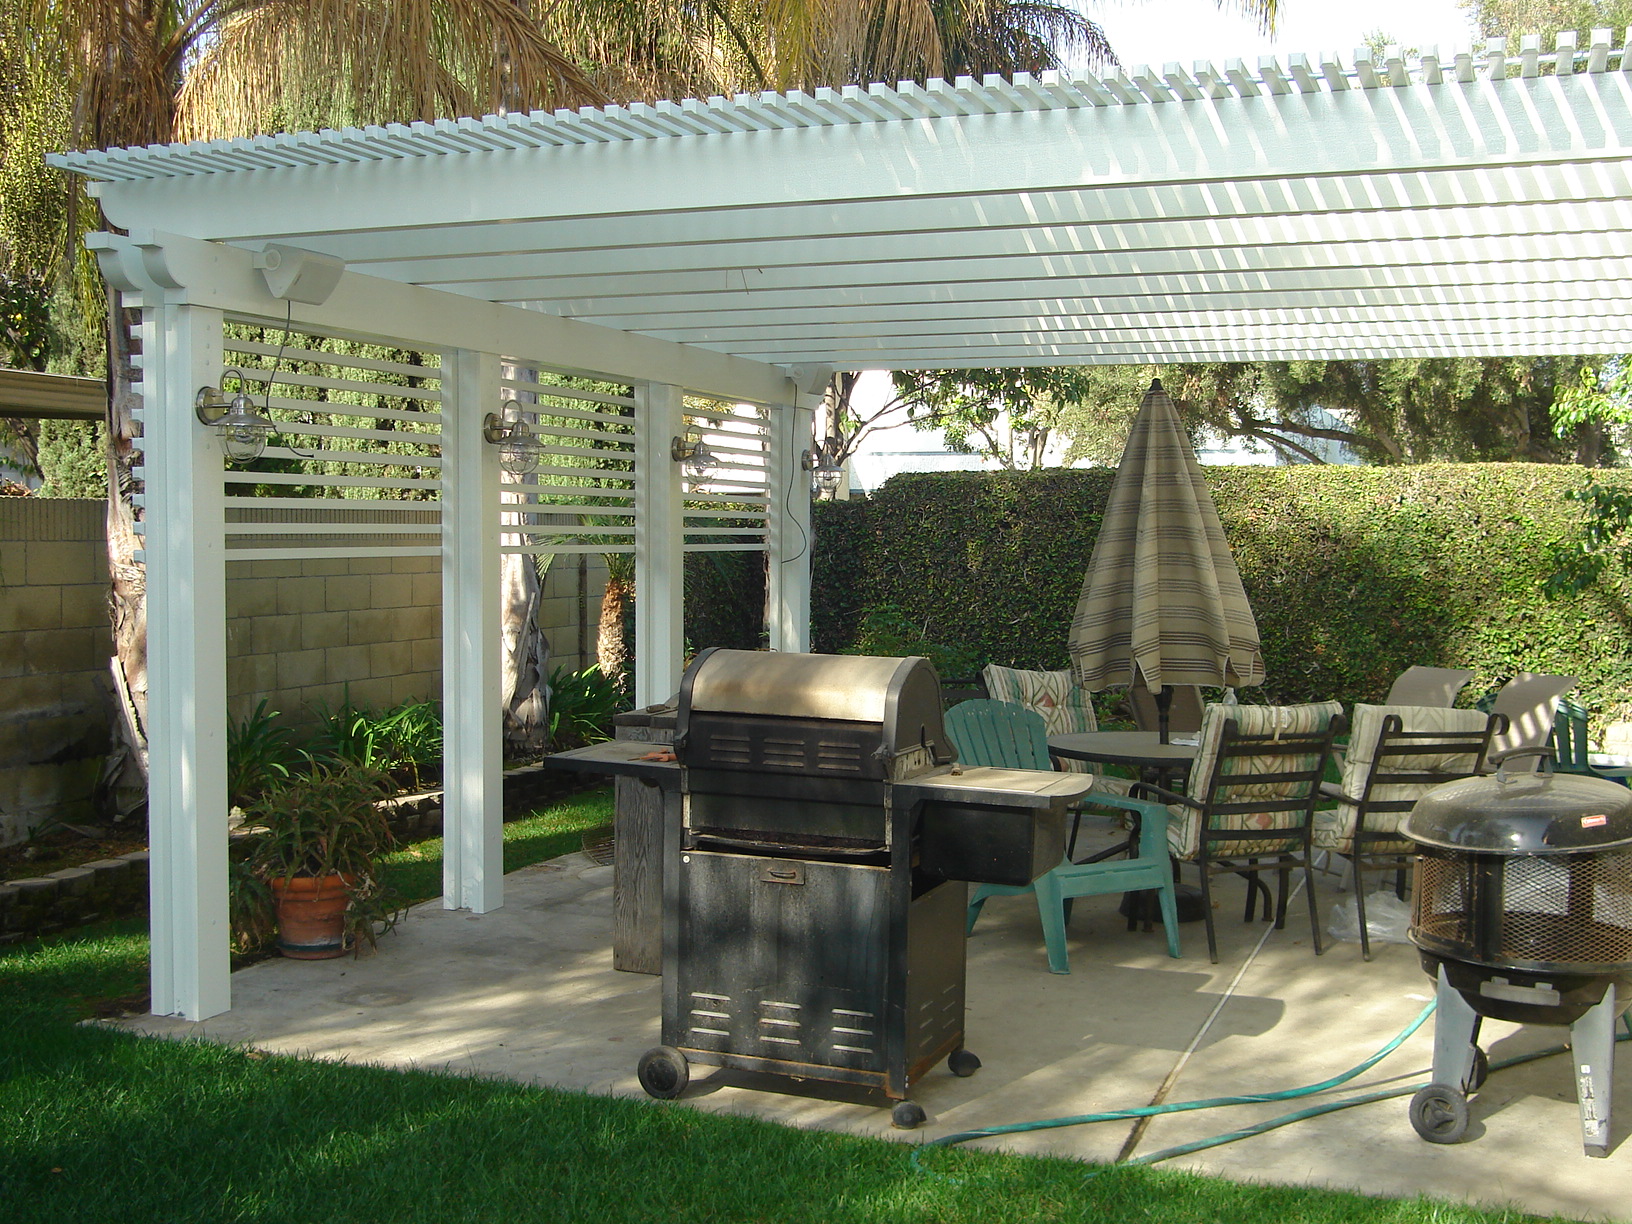 Patio Cover Lighting Options | roomsncovers
